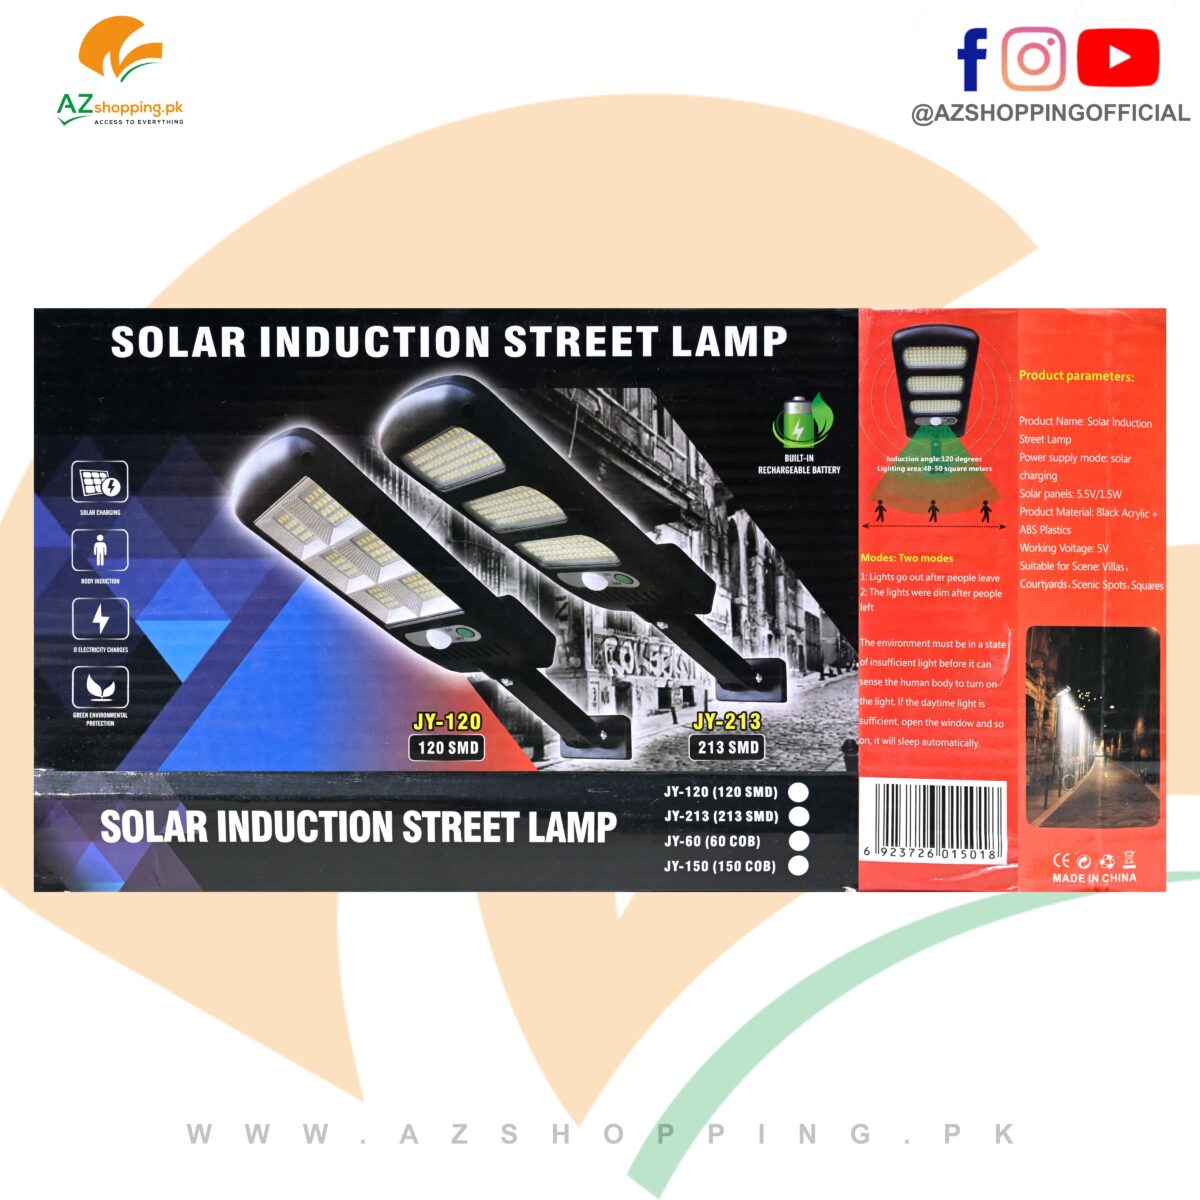 Solar Induction Street Lamp Solar Charging & Zero Electricity Charges with Built-in Rechargeable Battery – Model: JY-120 (120 SMD)